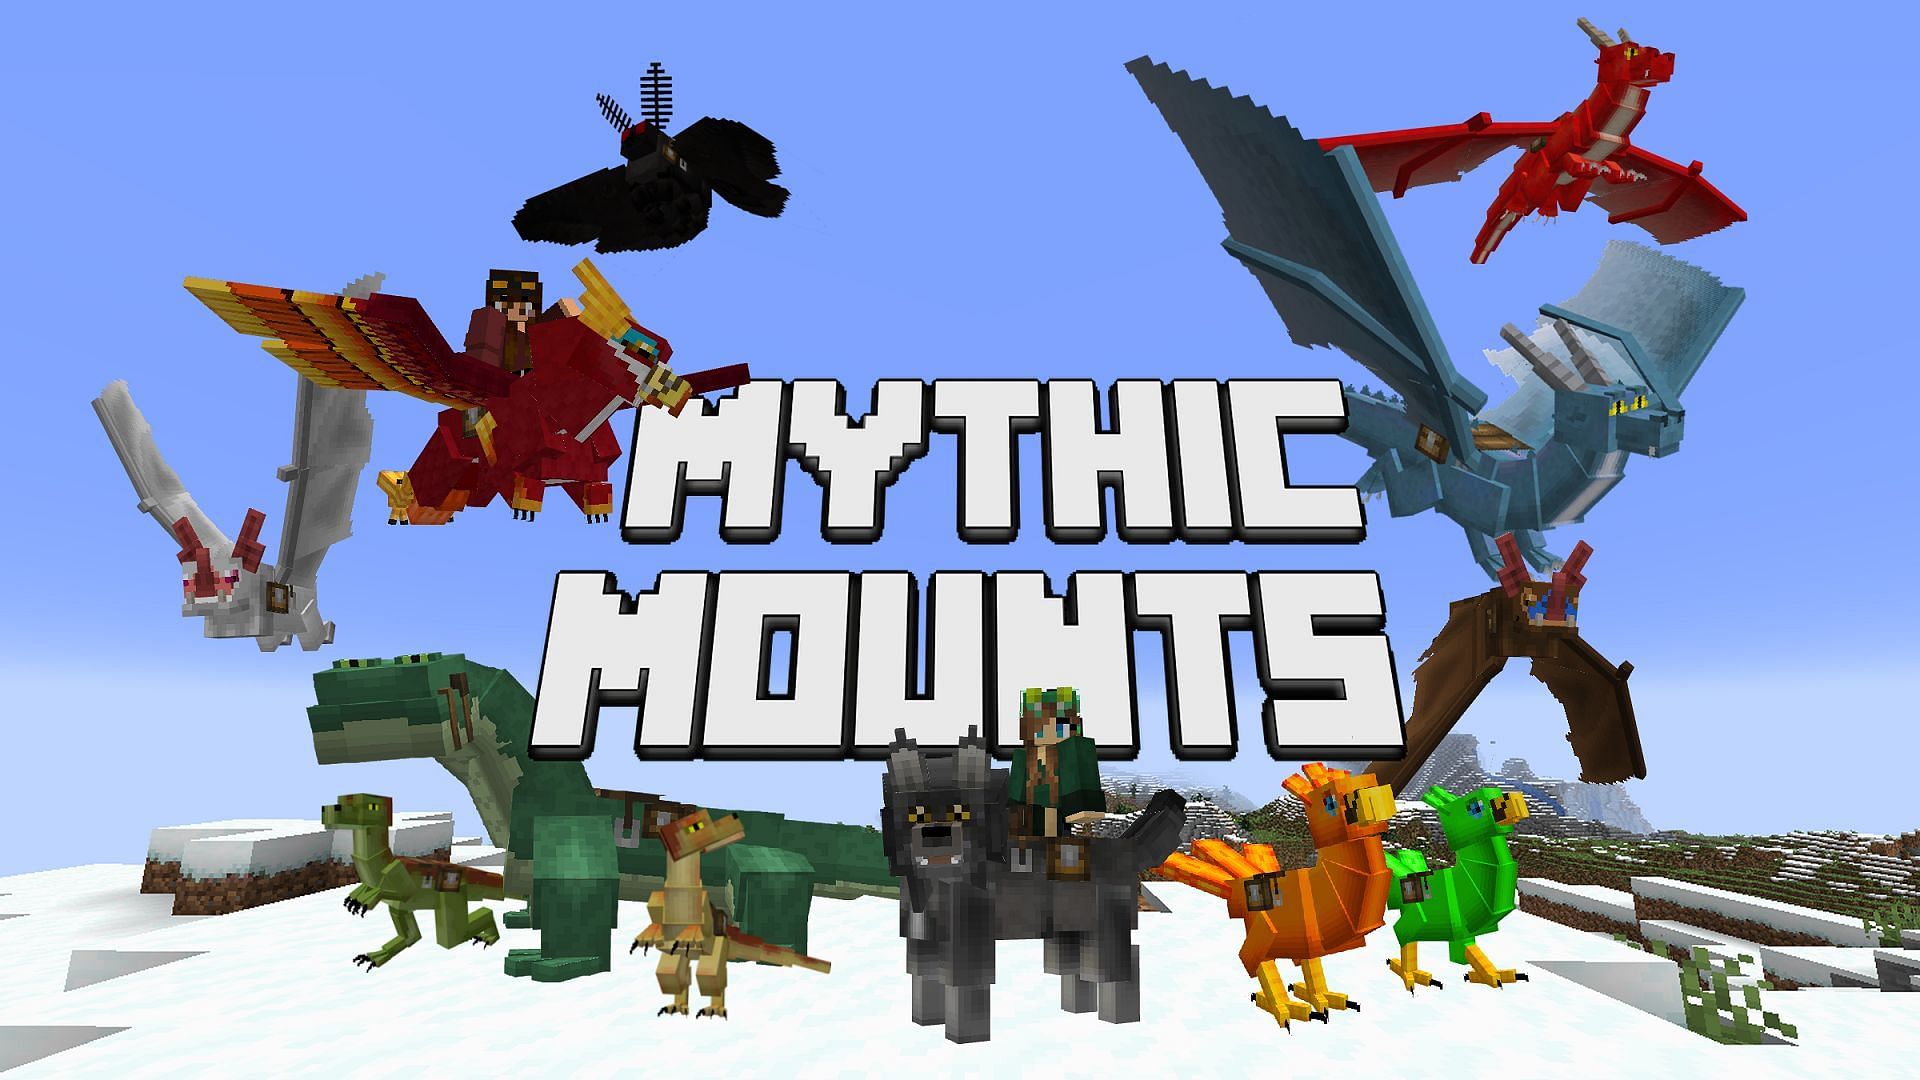 Mythic Mounts adds several creatures of legend to ride in Minecraft, including in the air (Image via Chirpy.cricket/Modrinth)